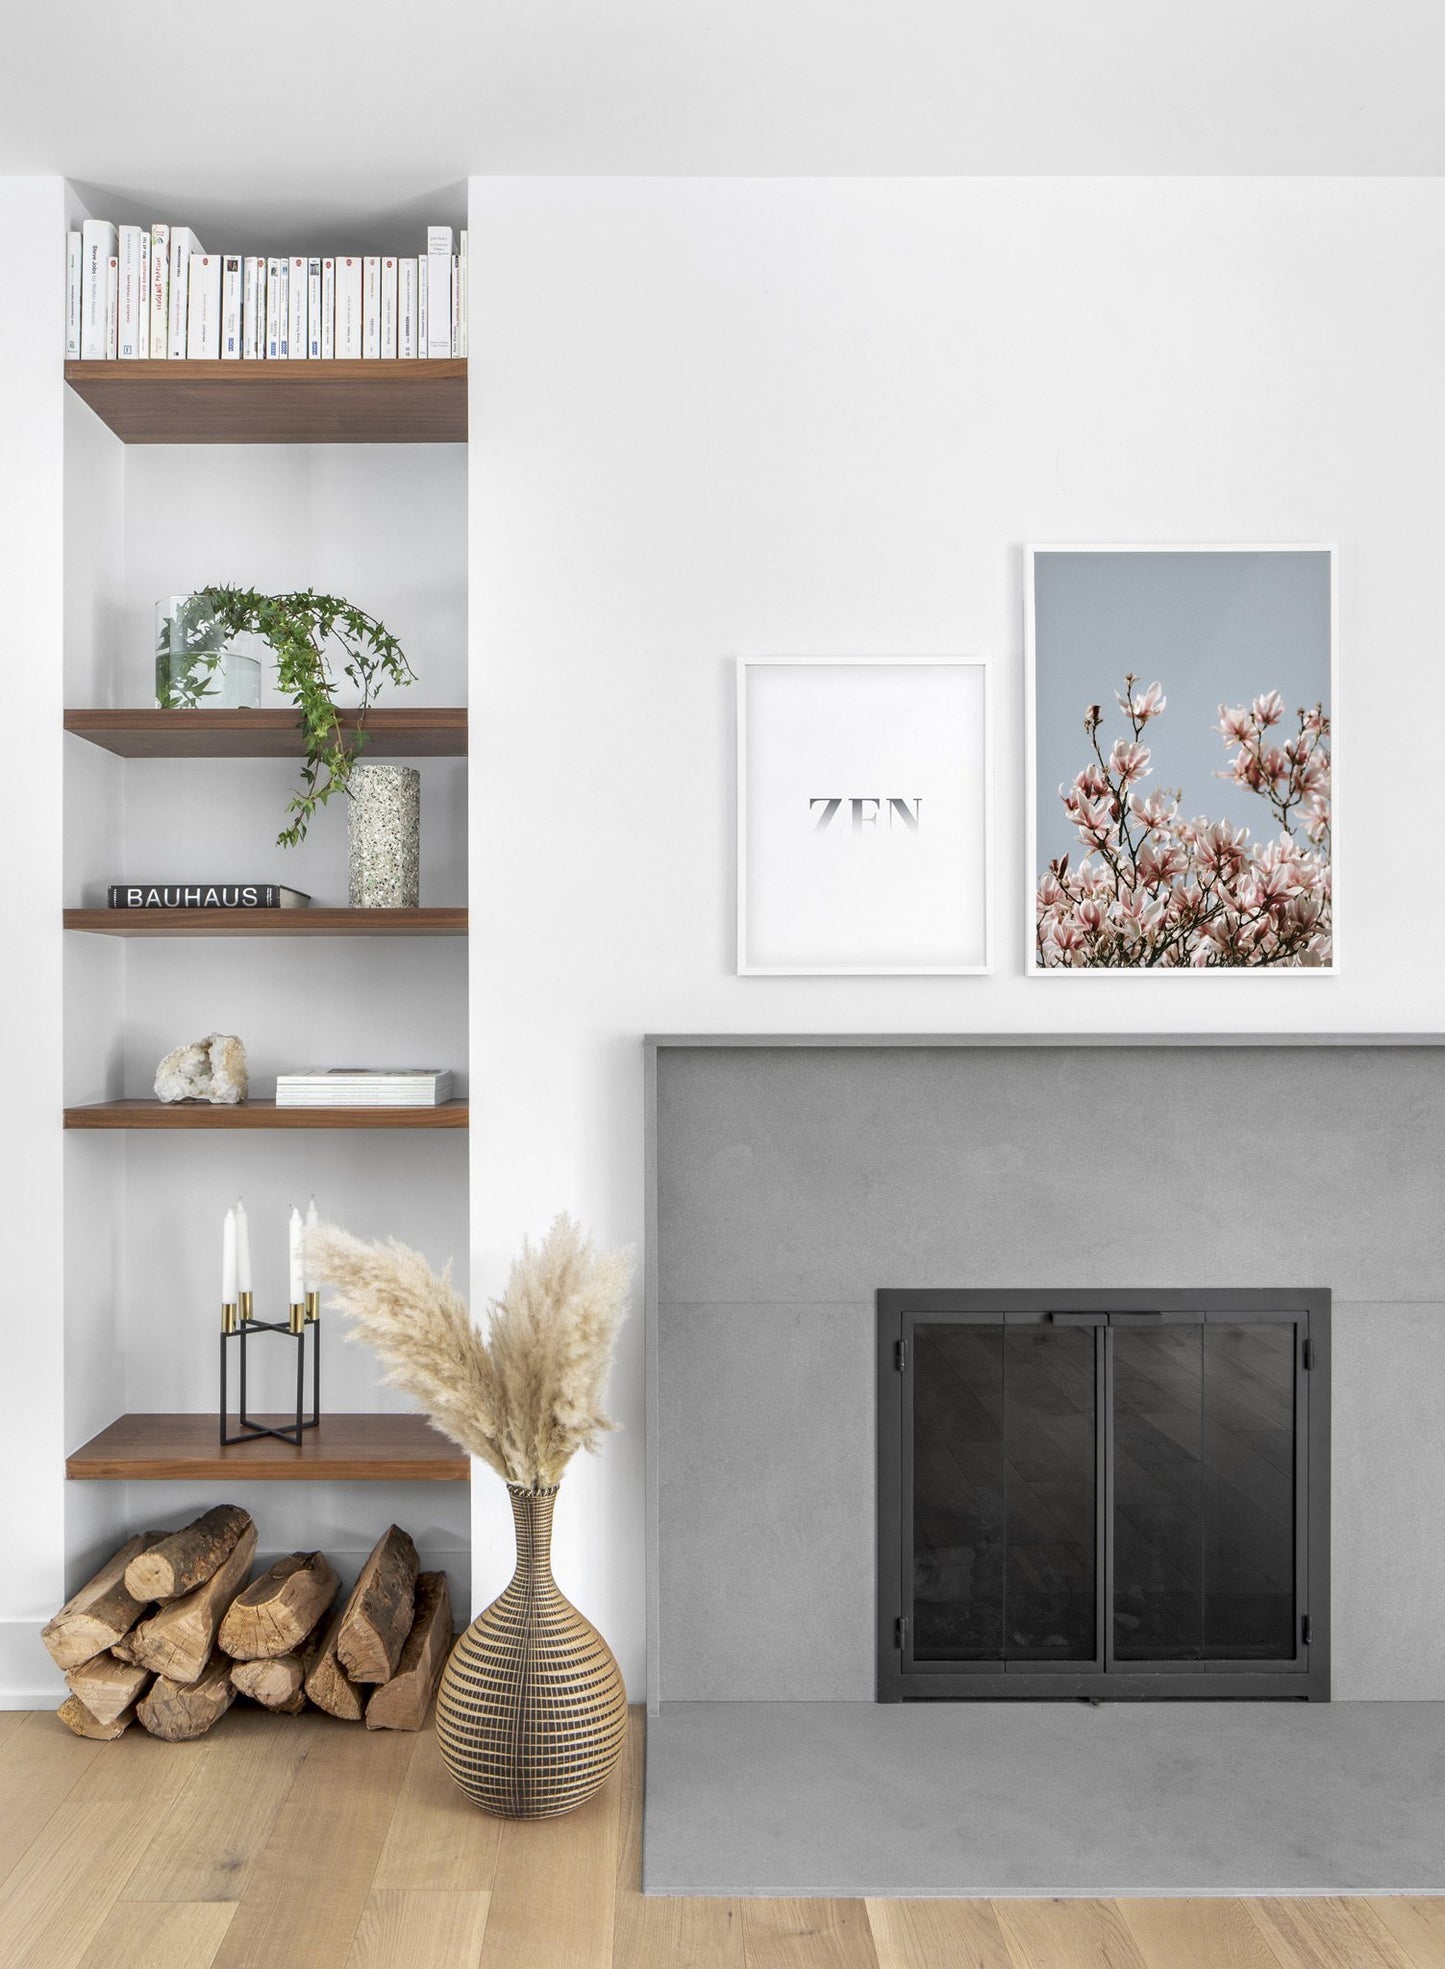 Soaring Flowers modern minimalist floral photography poster by Opposite Wall - Living room with gallery wall duo